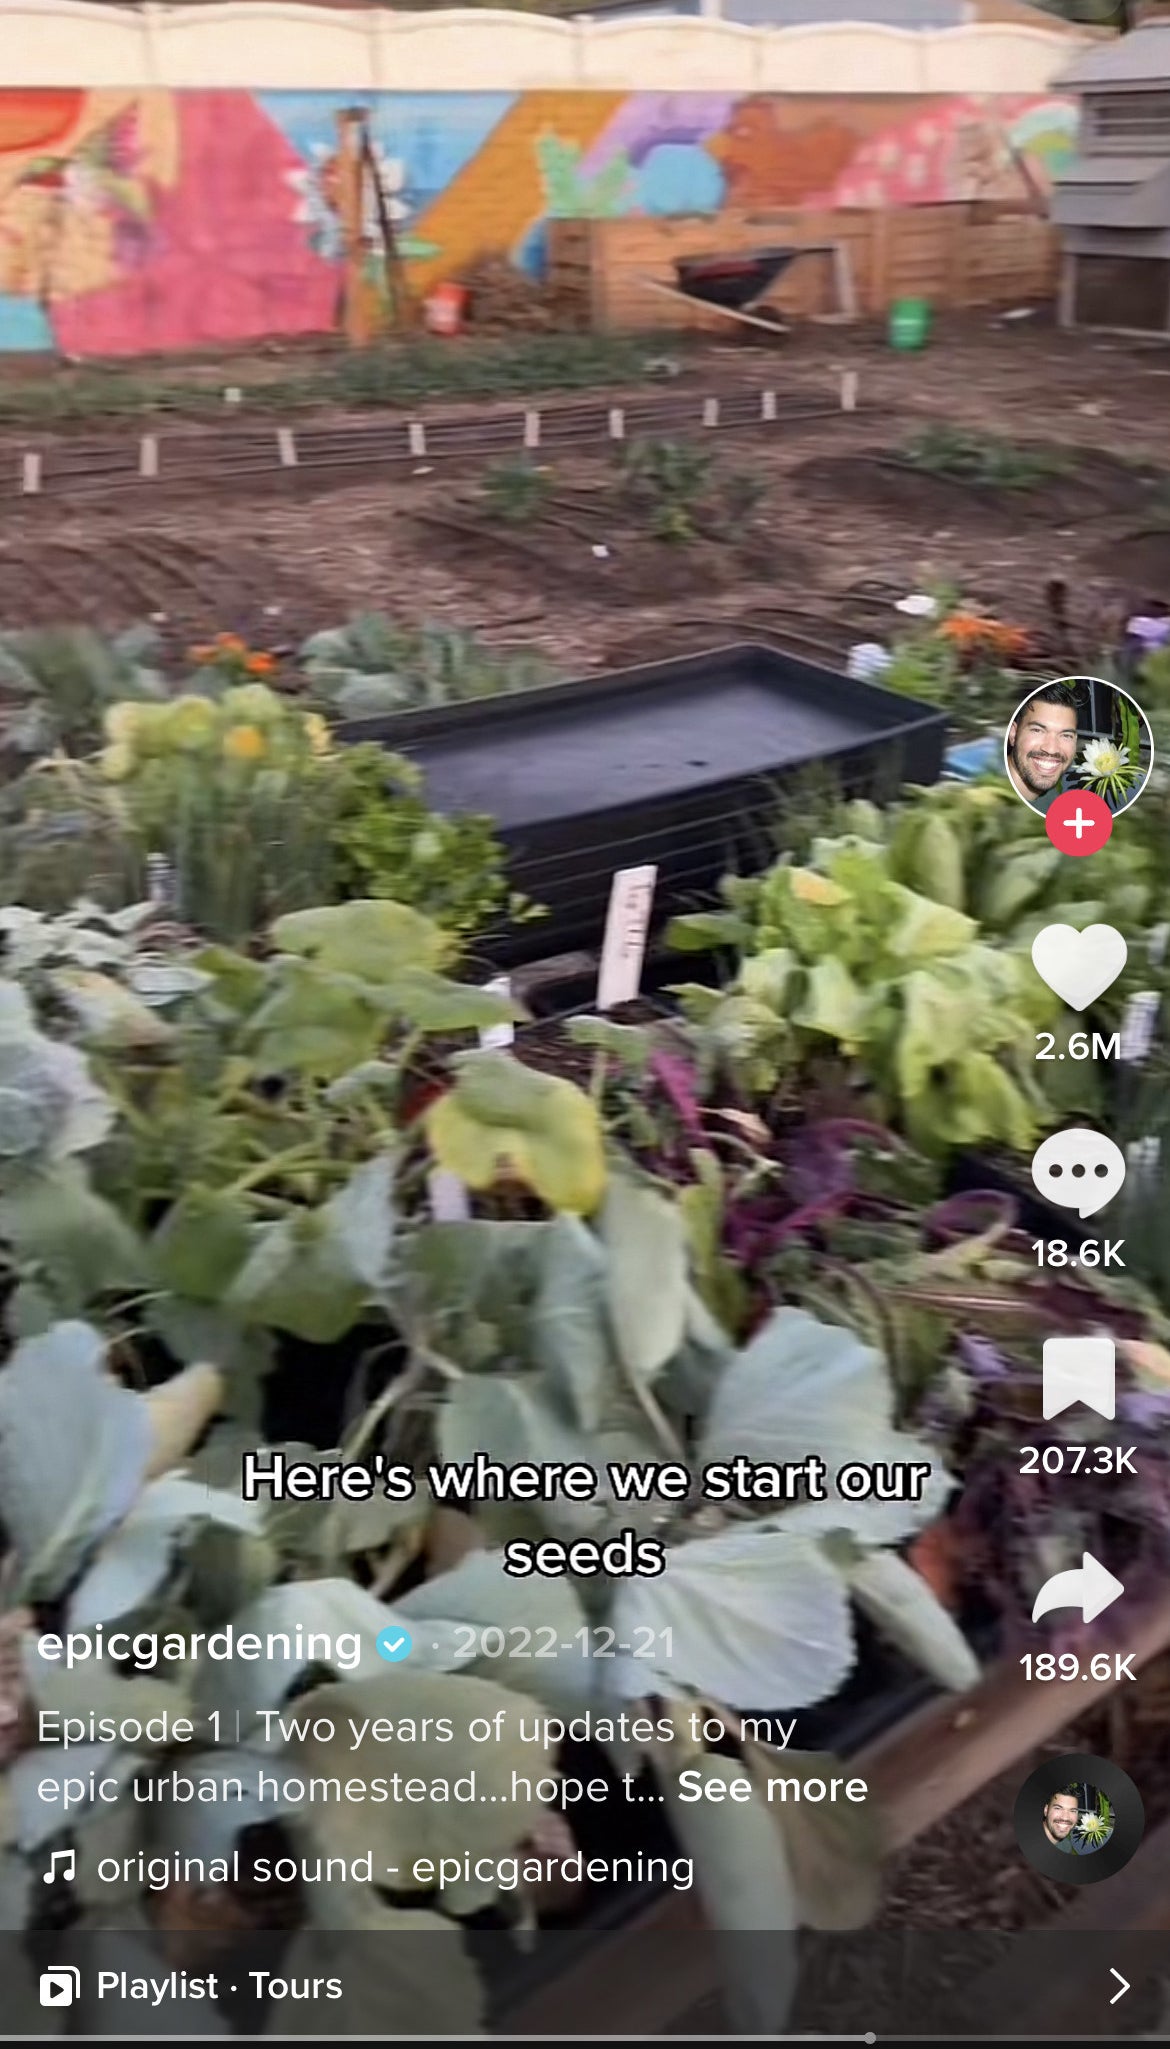 Screenshot showing a close-up of his garden where he plants his seeds